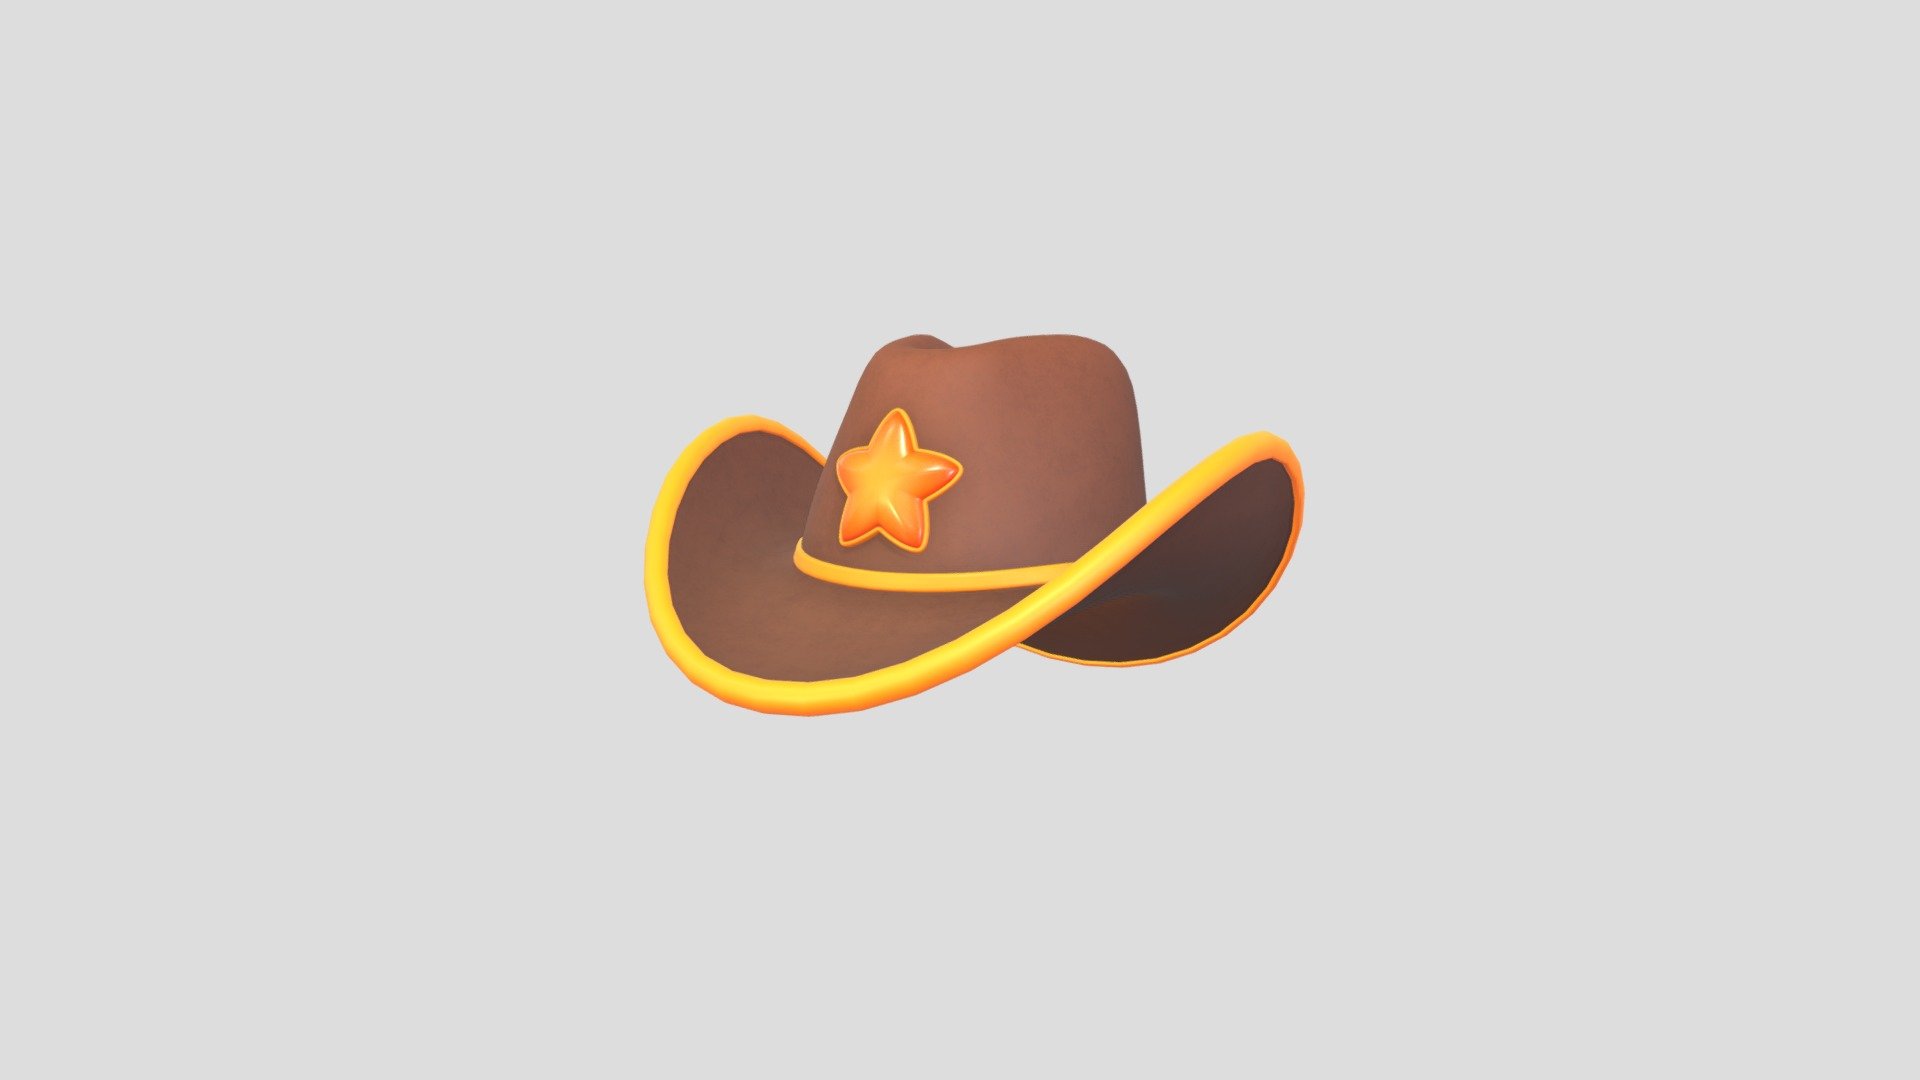 Cowboy Hat 3d model.      
    


File Format      
 
- 3ds max 2023  
 
- Blender 4.0  
 
- FBX  
 
- GLB  
 
- OBJ  
    


Clean topology    

No Rig                          

Non-overlapping unwrapped UVs        
 


PNG texture               

2048x2048                


- Base Color                        

- Normal                            

- Roughness                         



1,986 polygons                          

2,147 vertexs                          
 - Prop250 Cowboy Hat - Buy Royalty Free 3D model by BaluCG 3d model